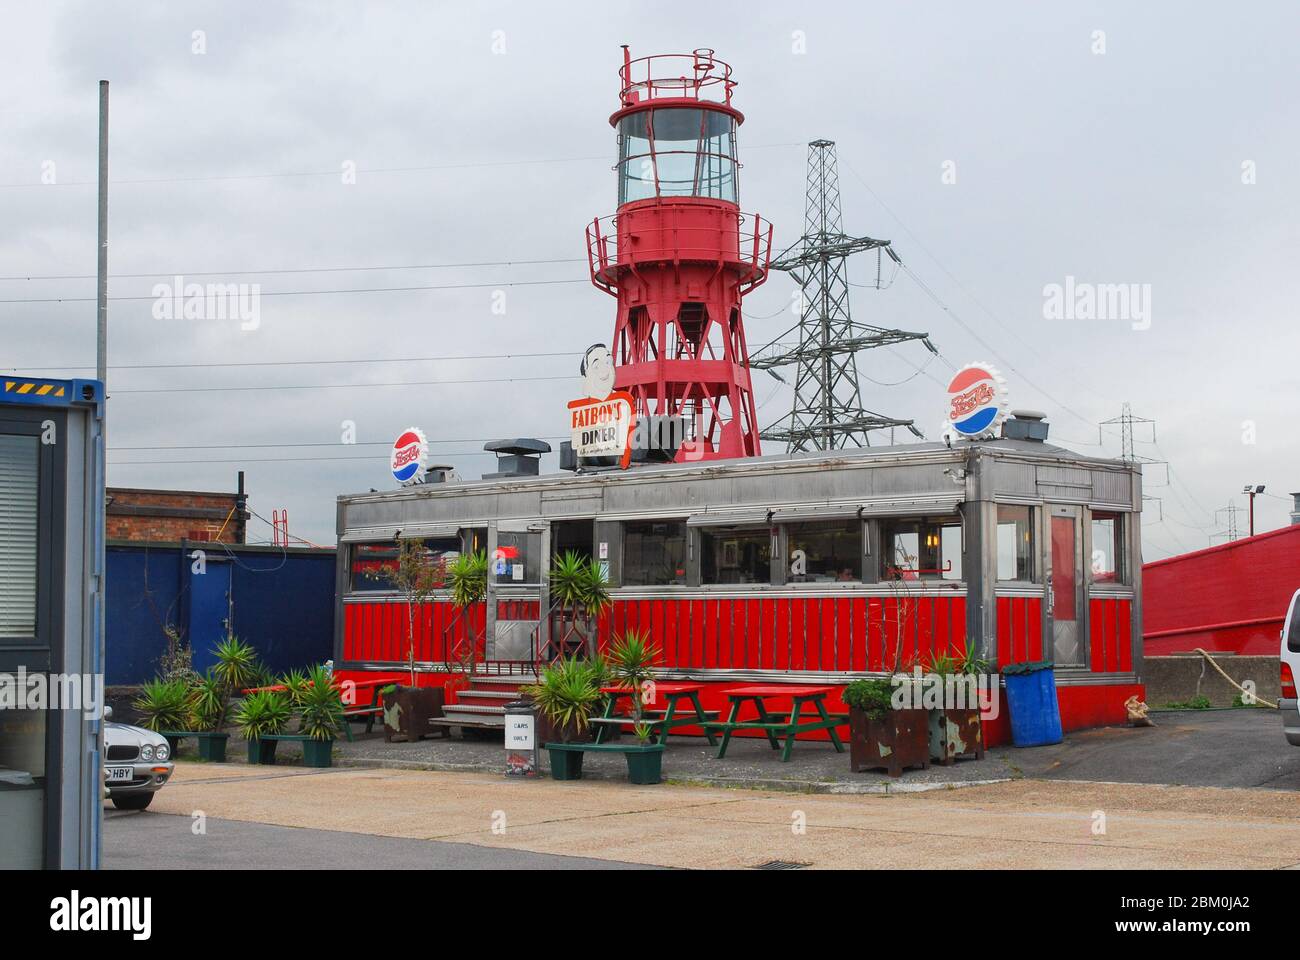 Shipping Containers Colourful Re-Use American Diner Flexible Low-Cost Housing Container City, 64 Orchard Place, Trinity Buoy Wharf, London E14 0JW Stock Photo